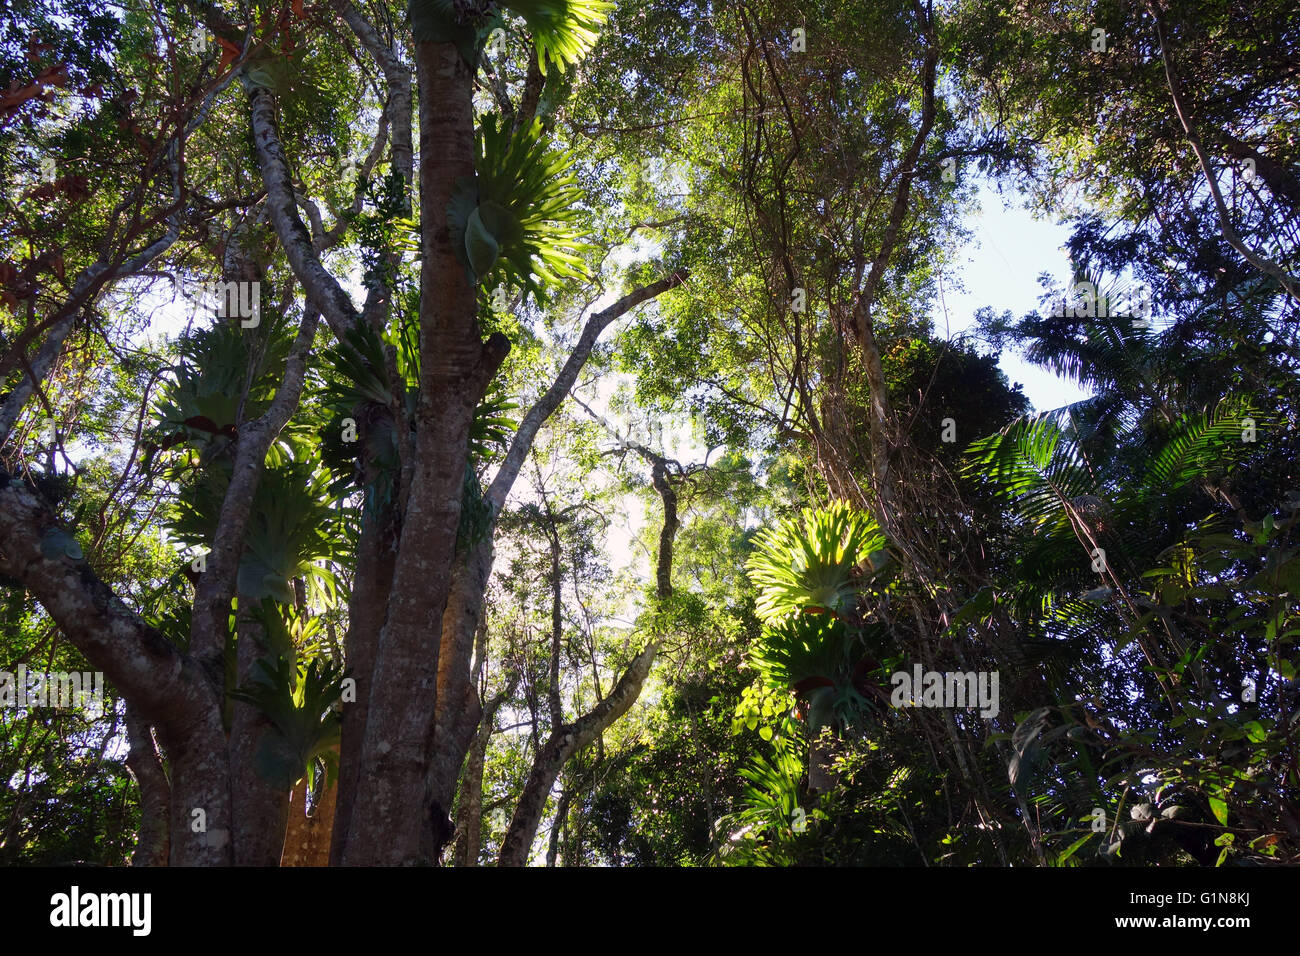 Staghorn ferns and other epiphytes growing on trees in rainforest canopy, Kondalilla National Park, Sunshine Coast, Queensland, Stock Photo